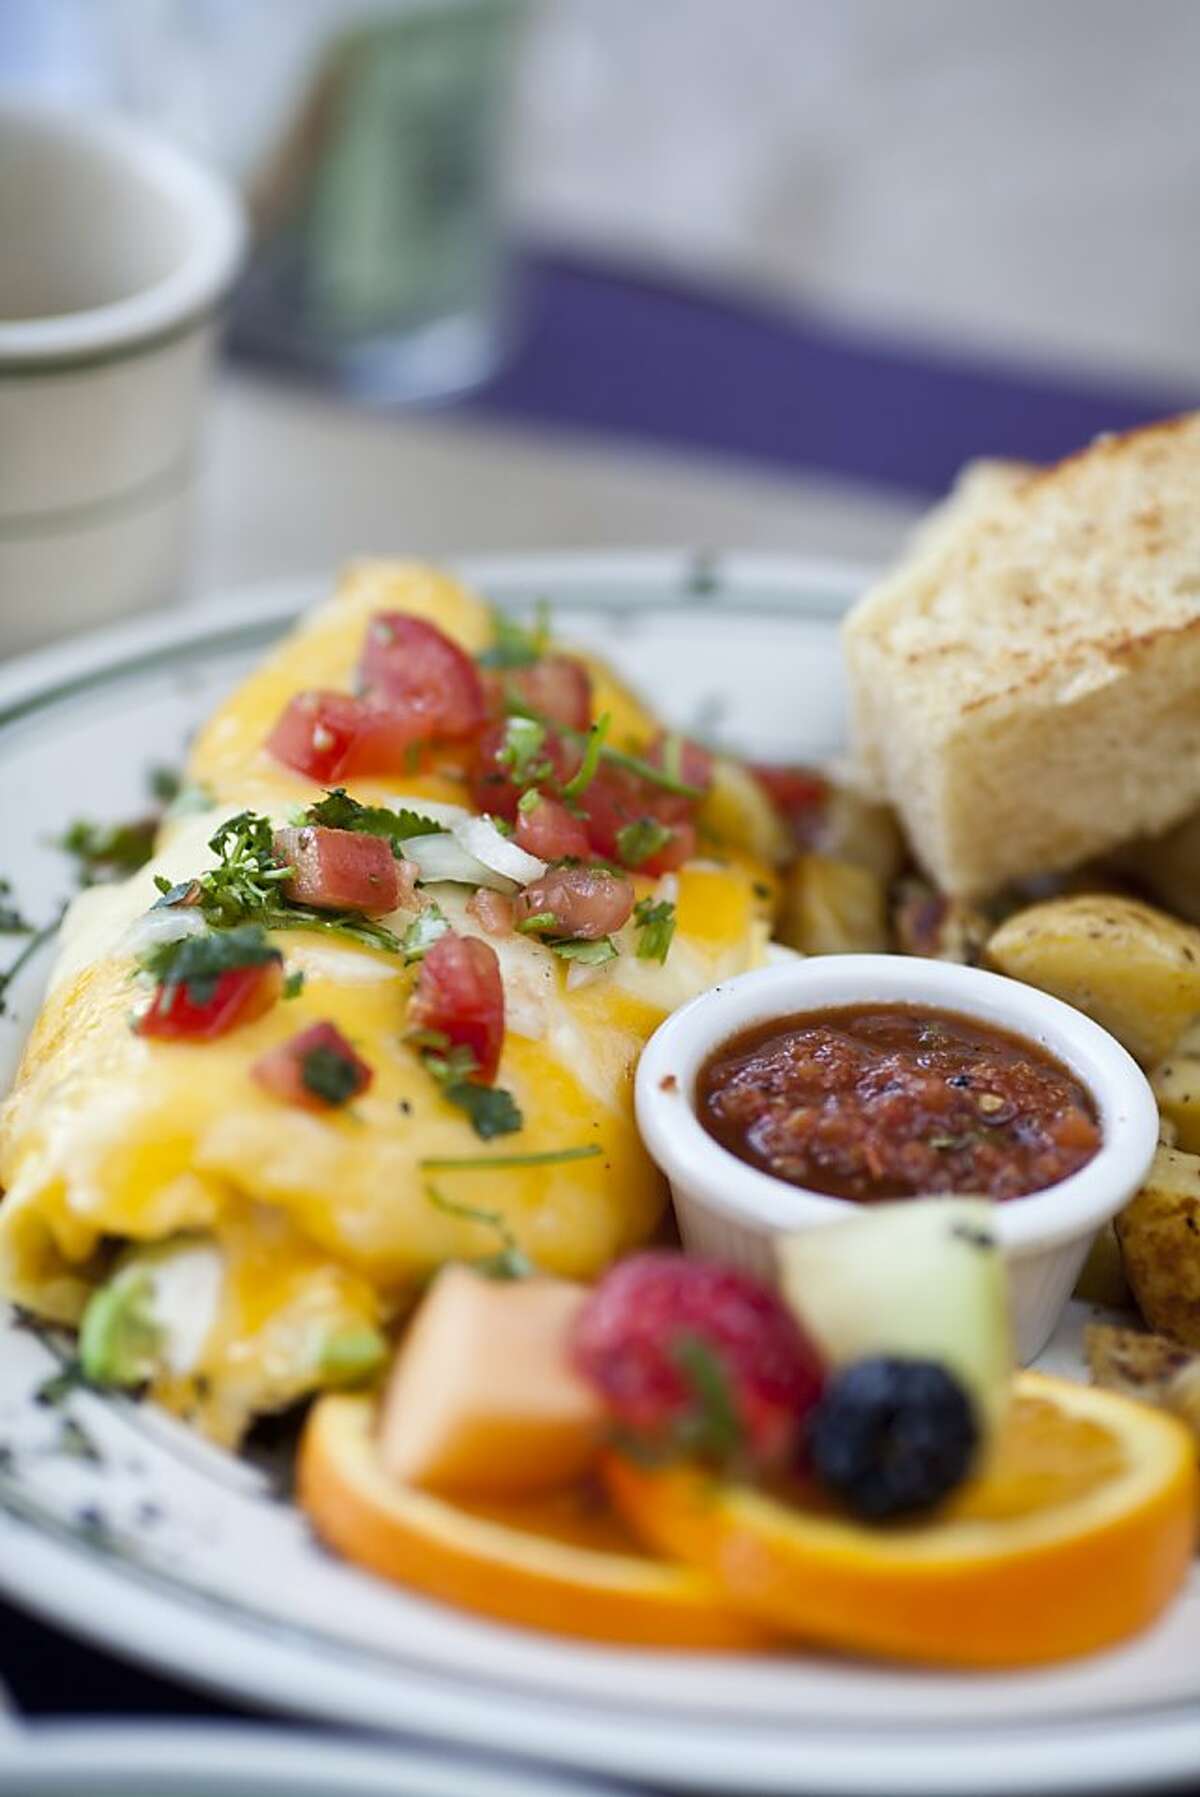 Where to get brunch in the Capital Region